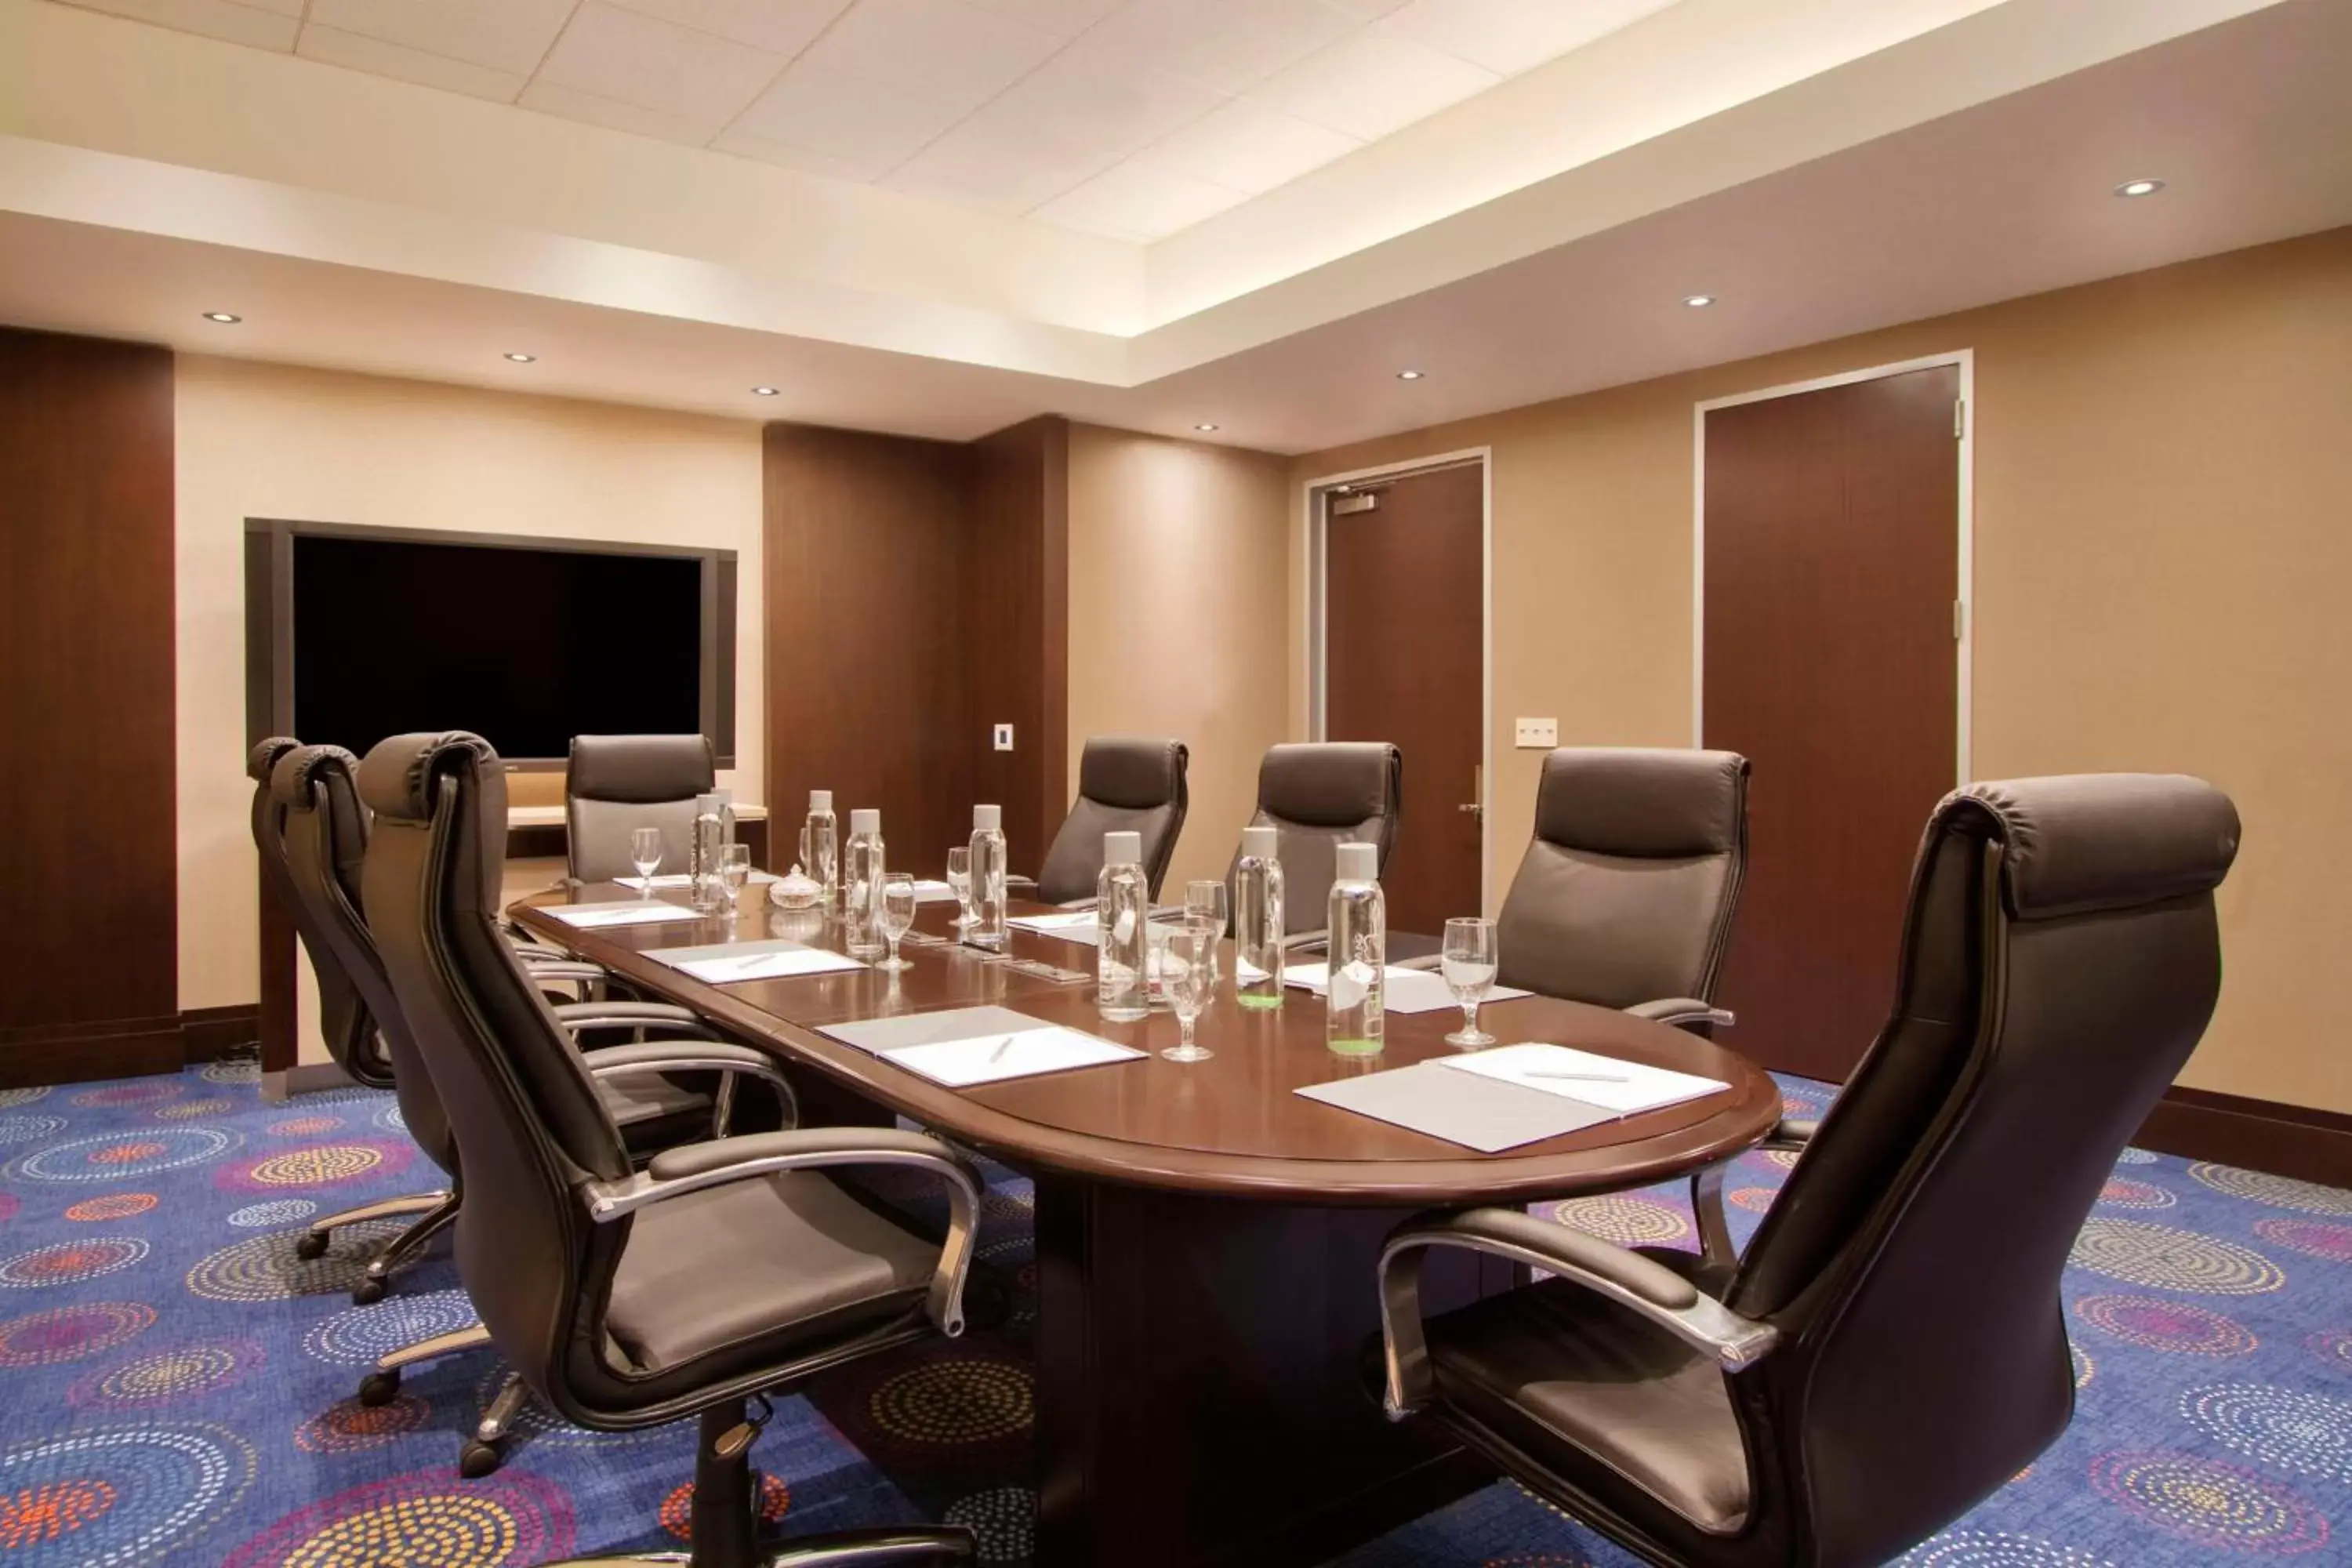 Meeting/conference room in Washington Hilton